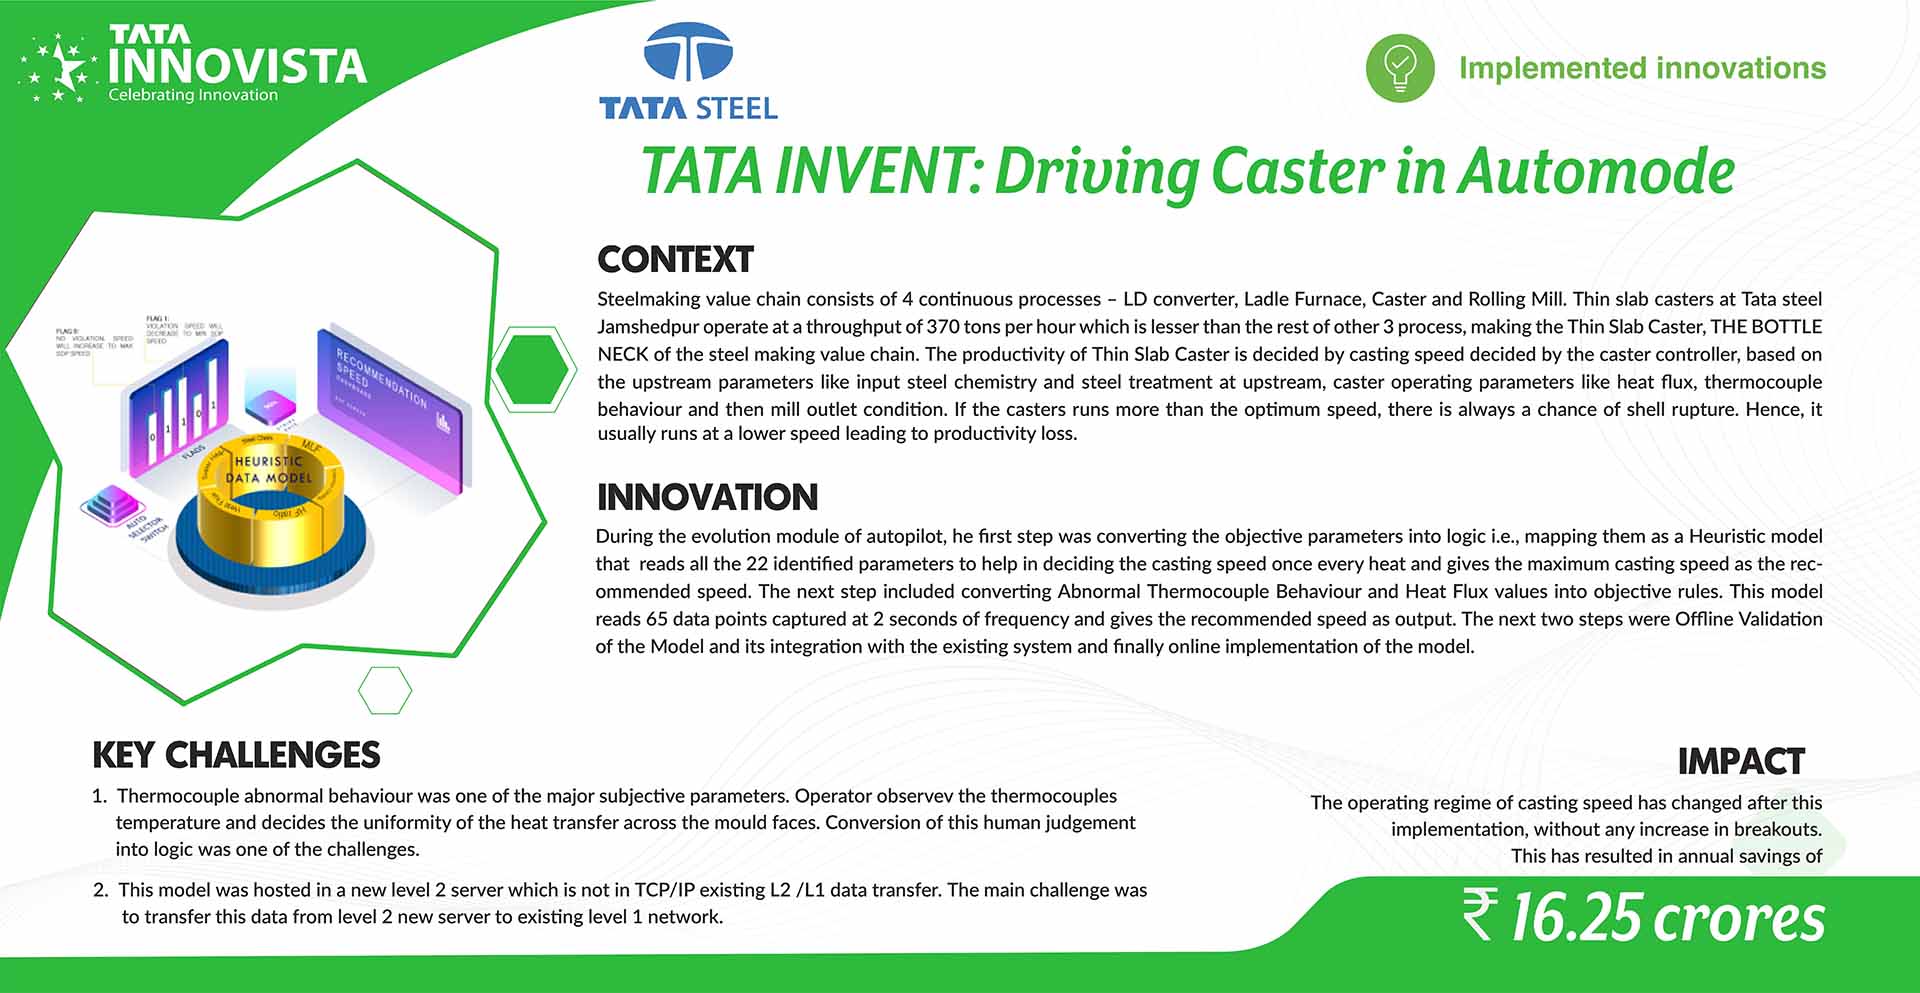 TATA INVENT: Driving Caster in automode